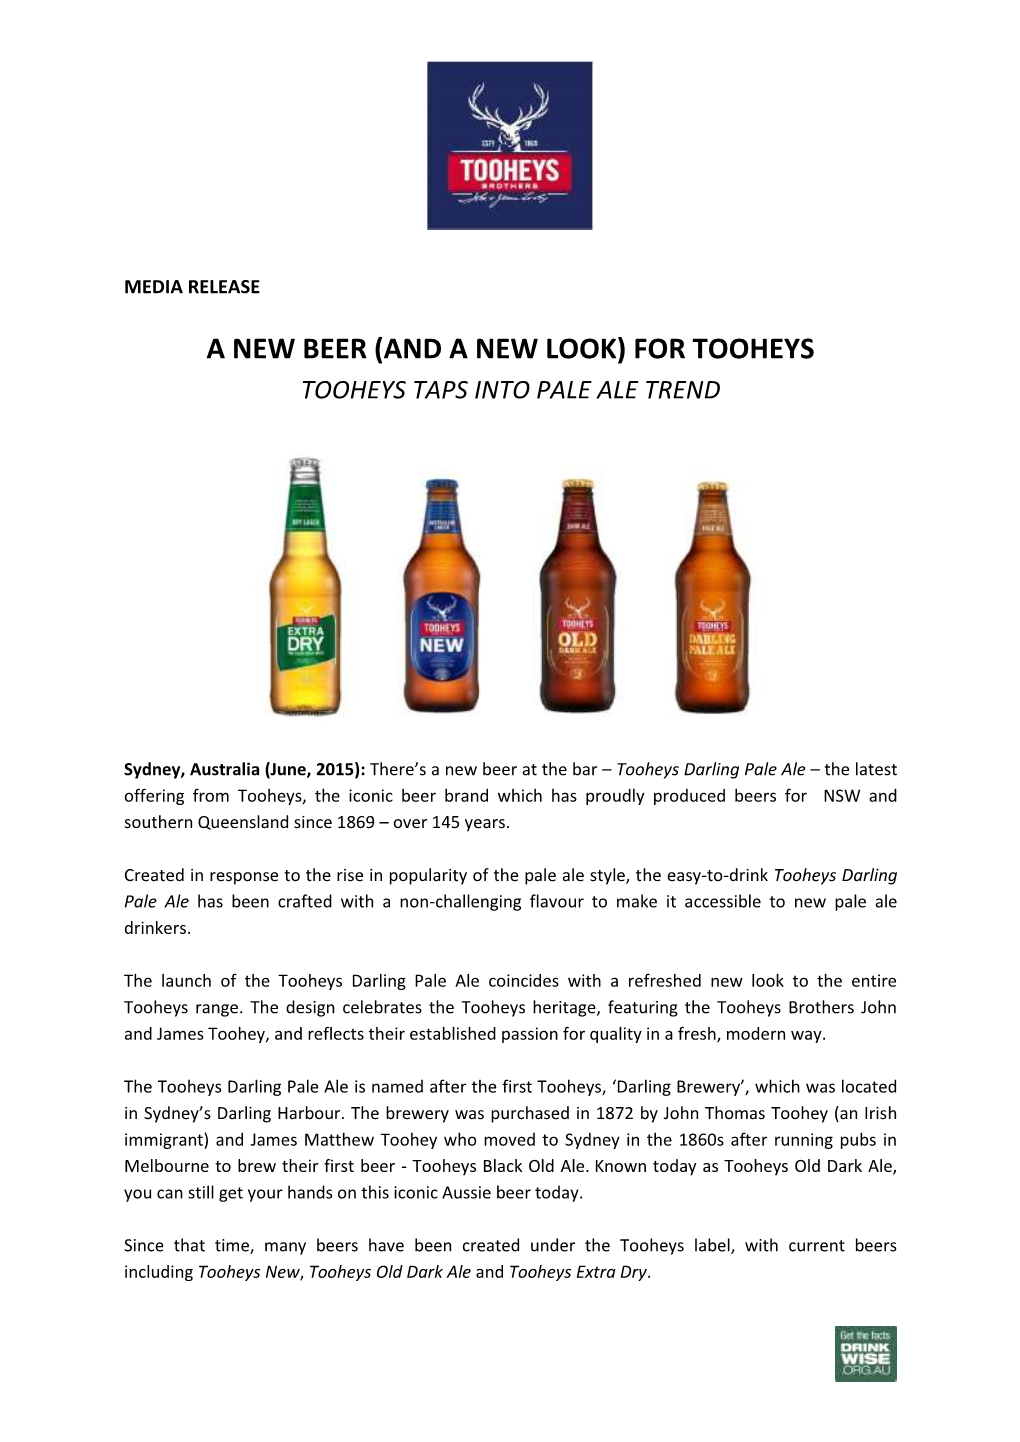 For Tooheys Tooheys Taps Into Pale Ale Trend